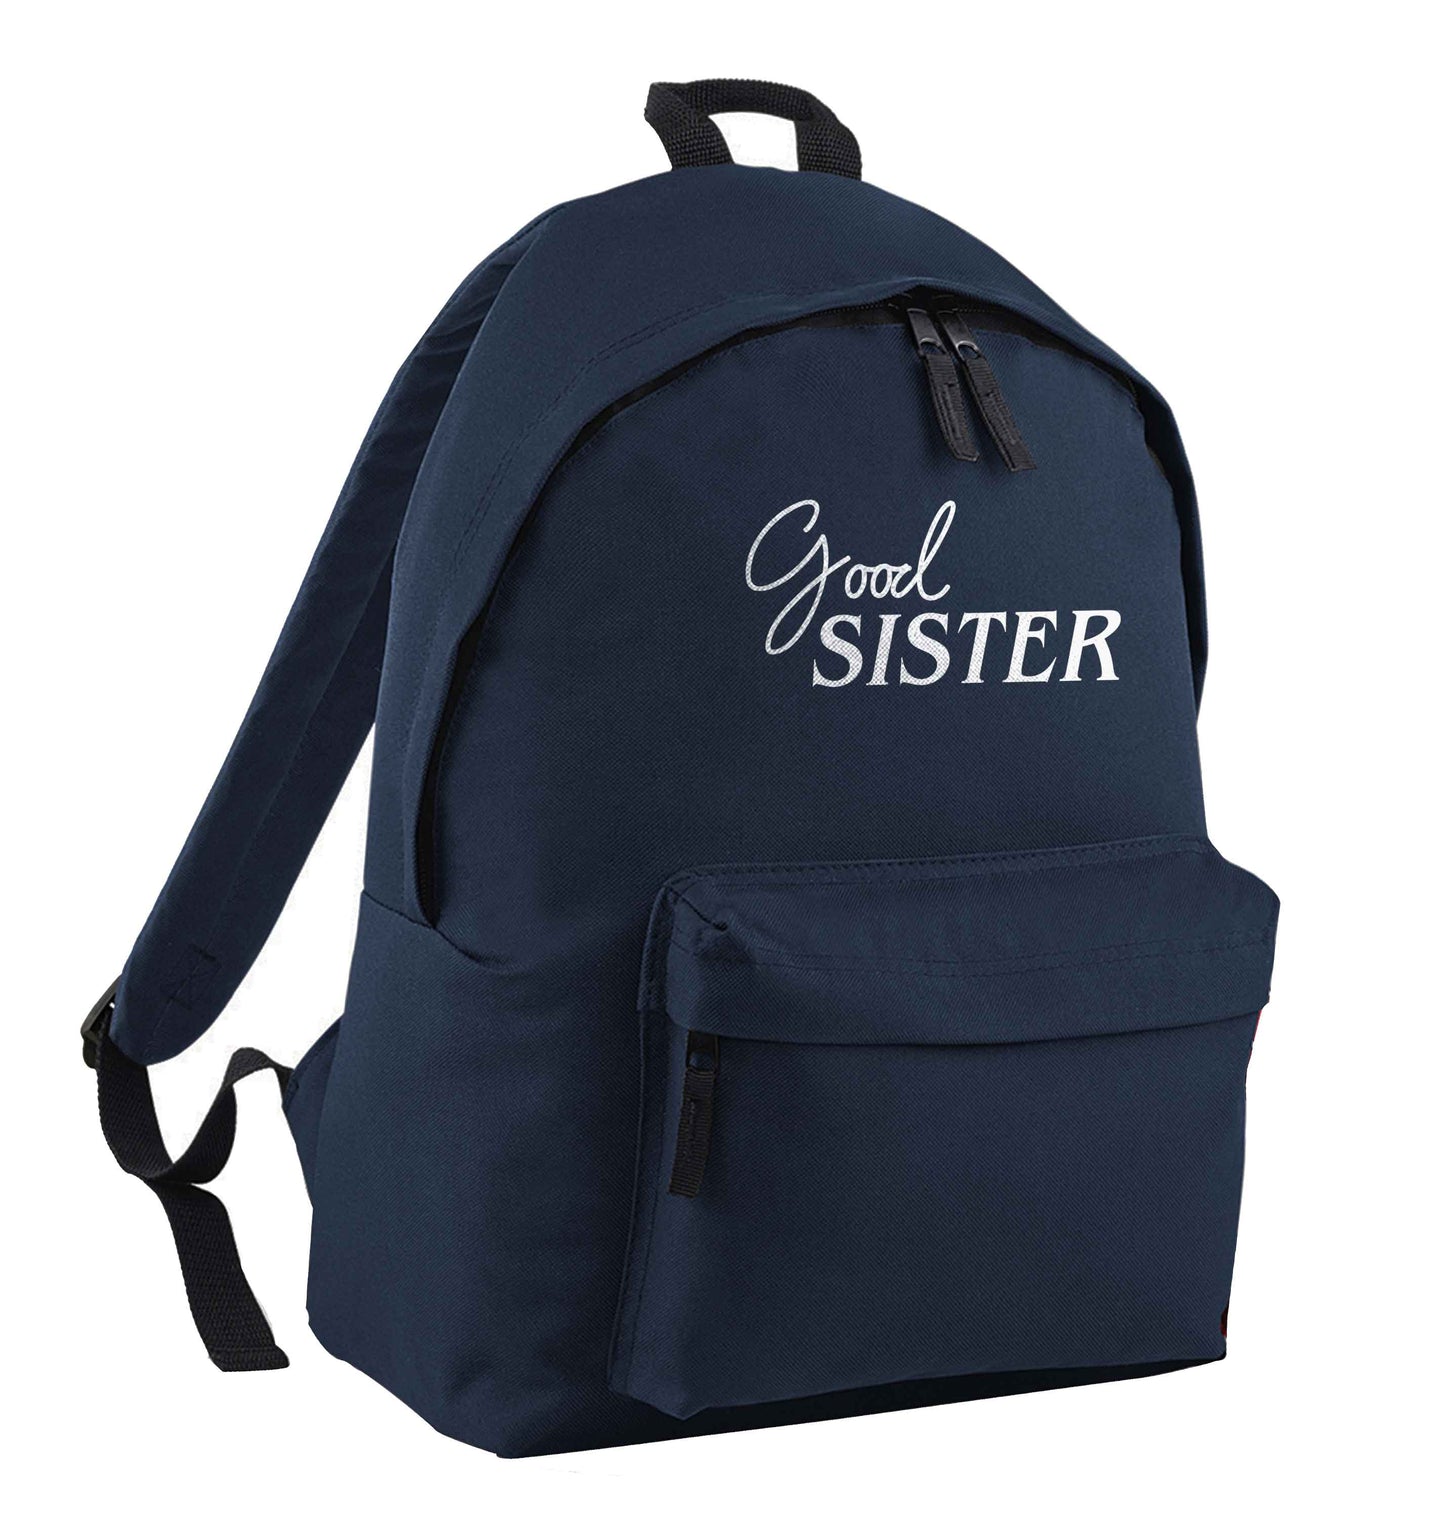 Good sister navy adults backpack